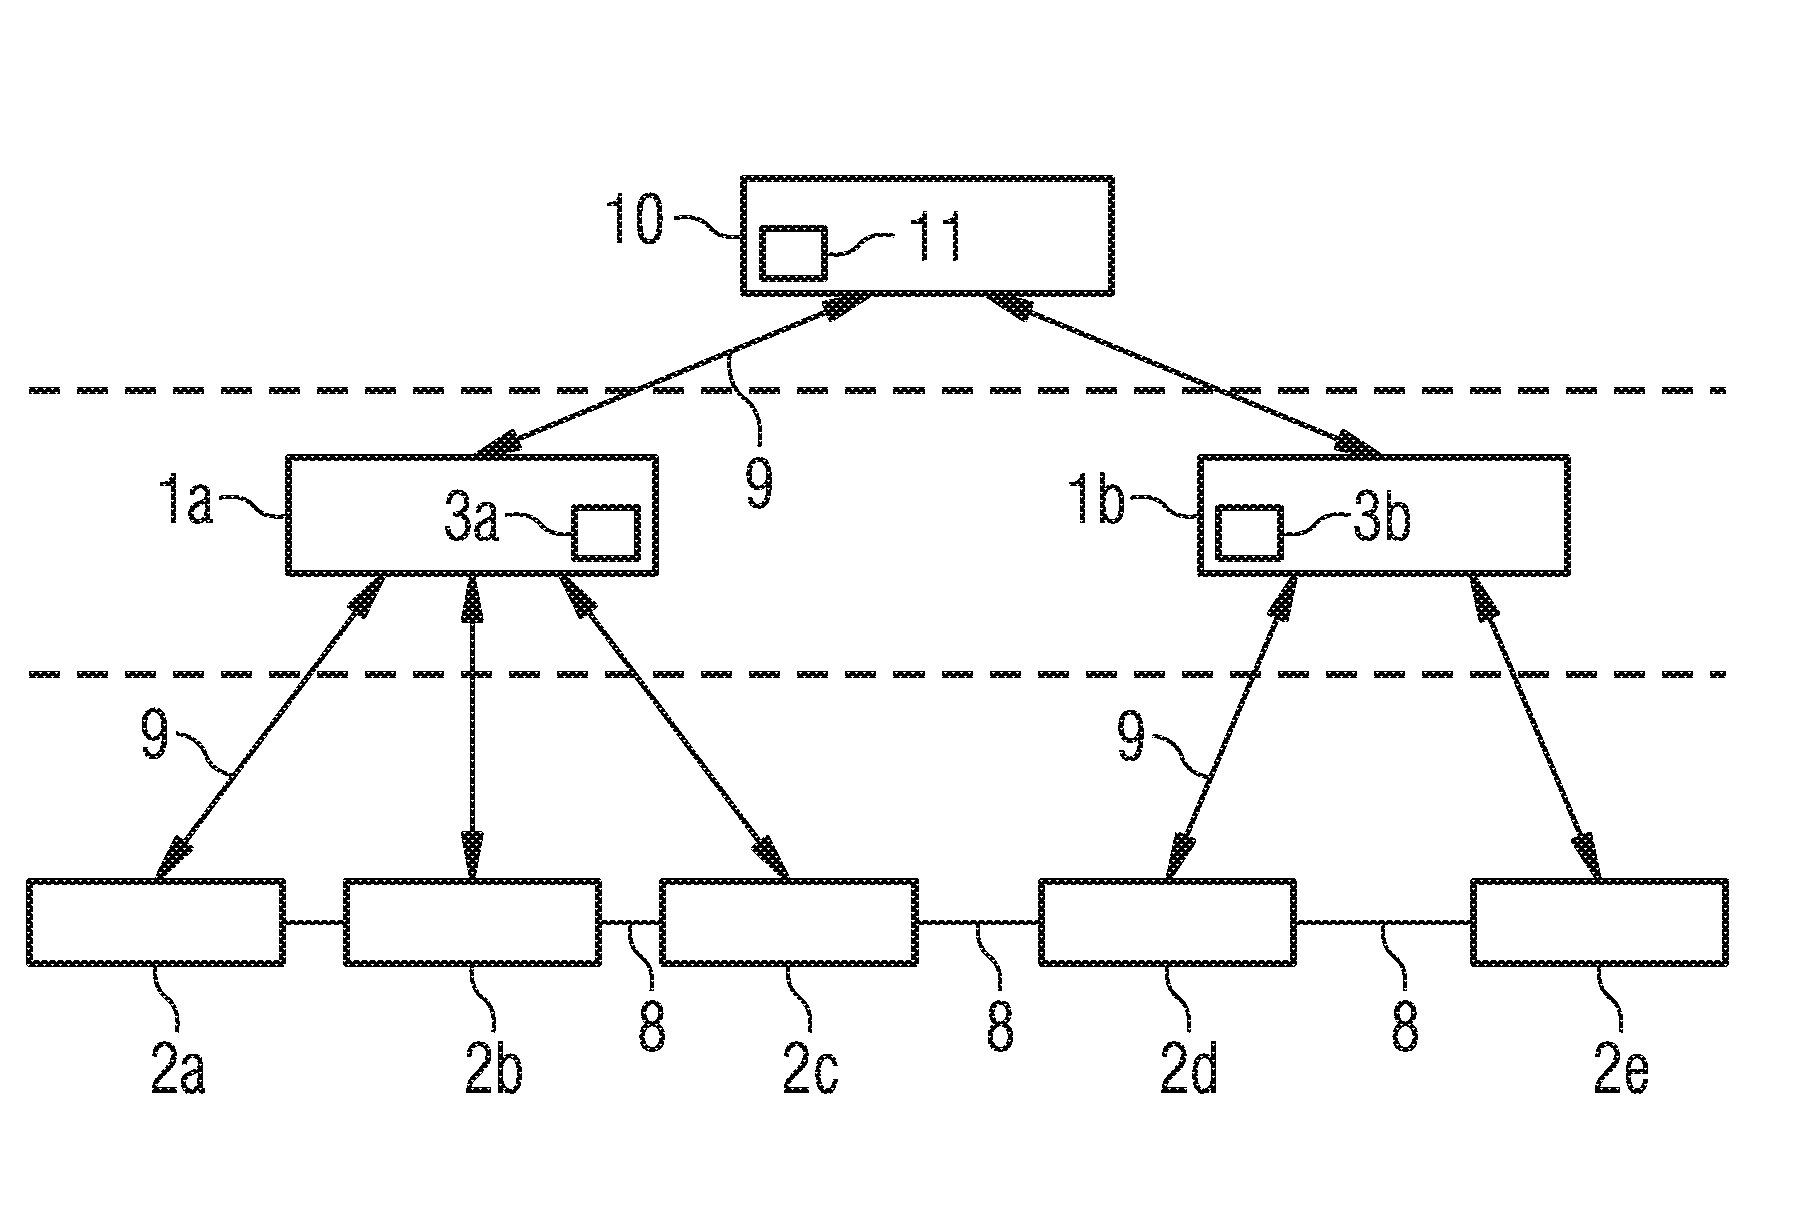 Fluid storage management system and method for monitoring fluid capacities and for controlling the transfer of fluid capacities within a fluid network